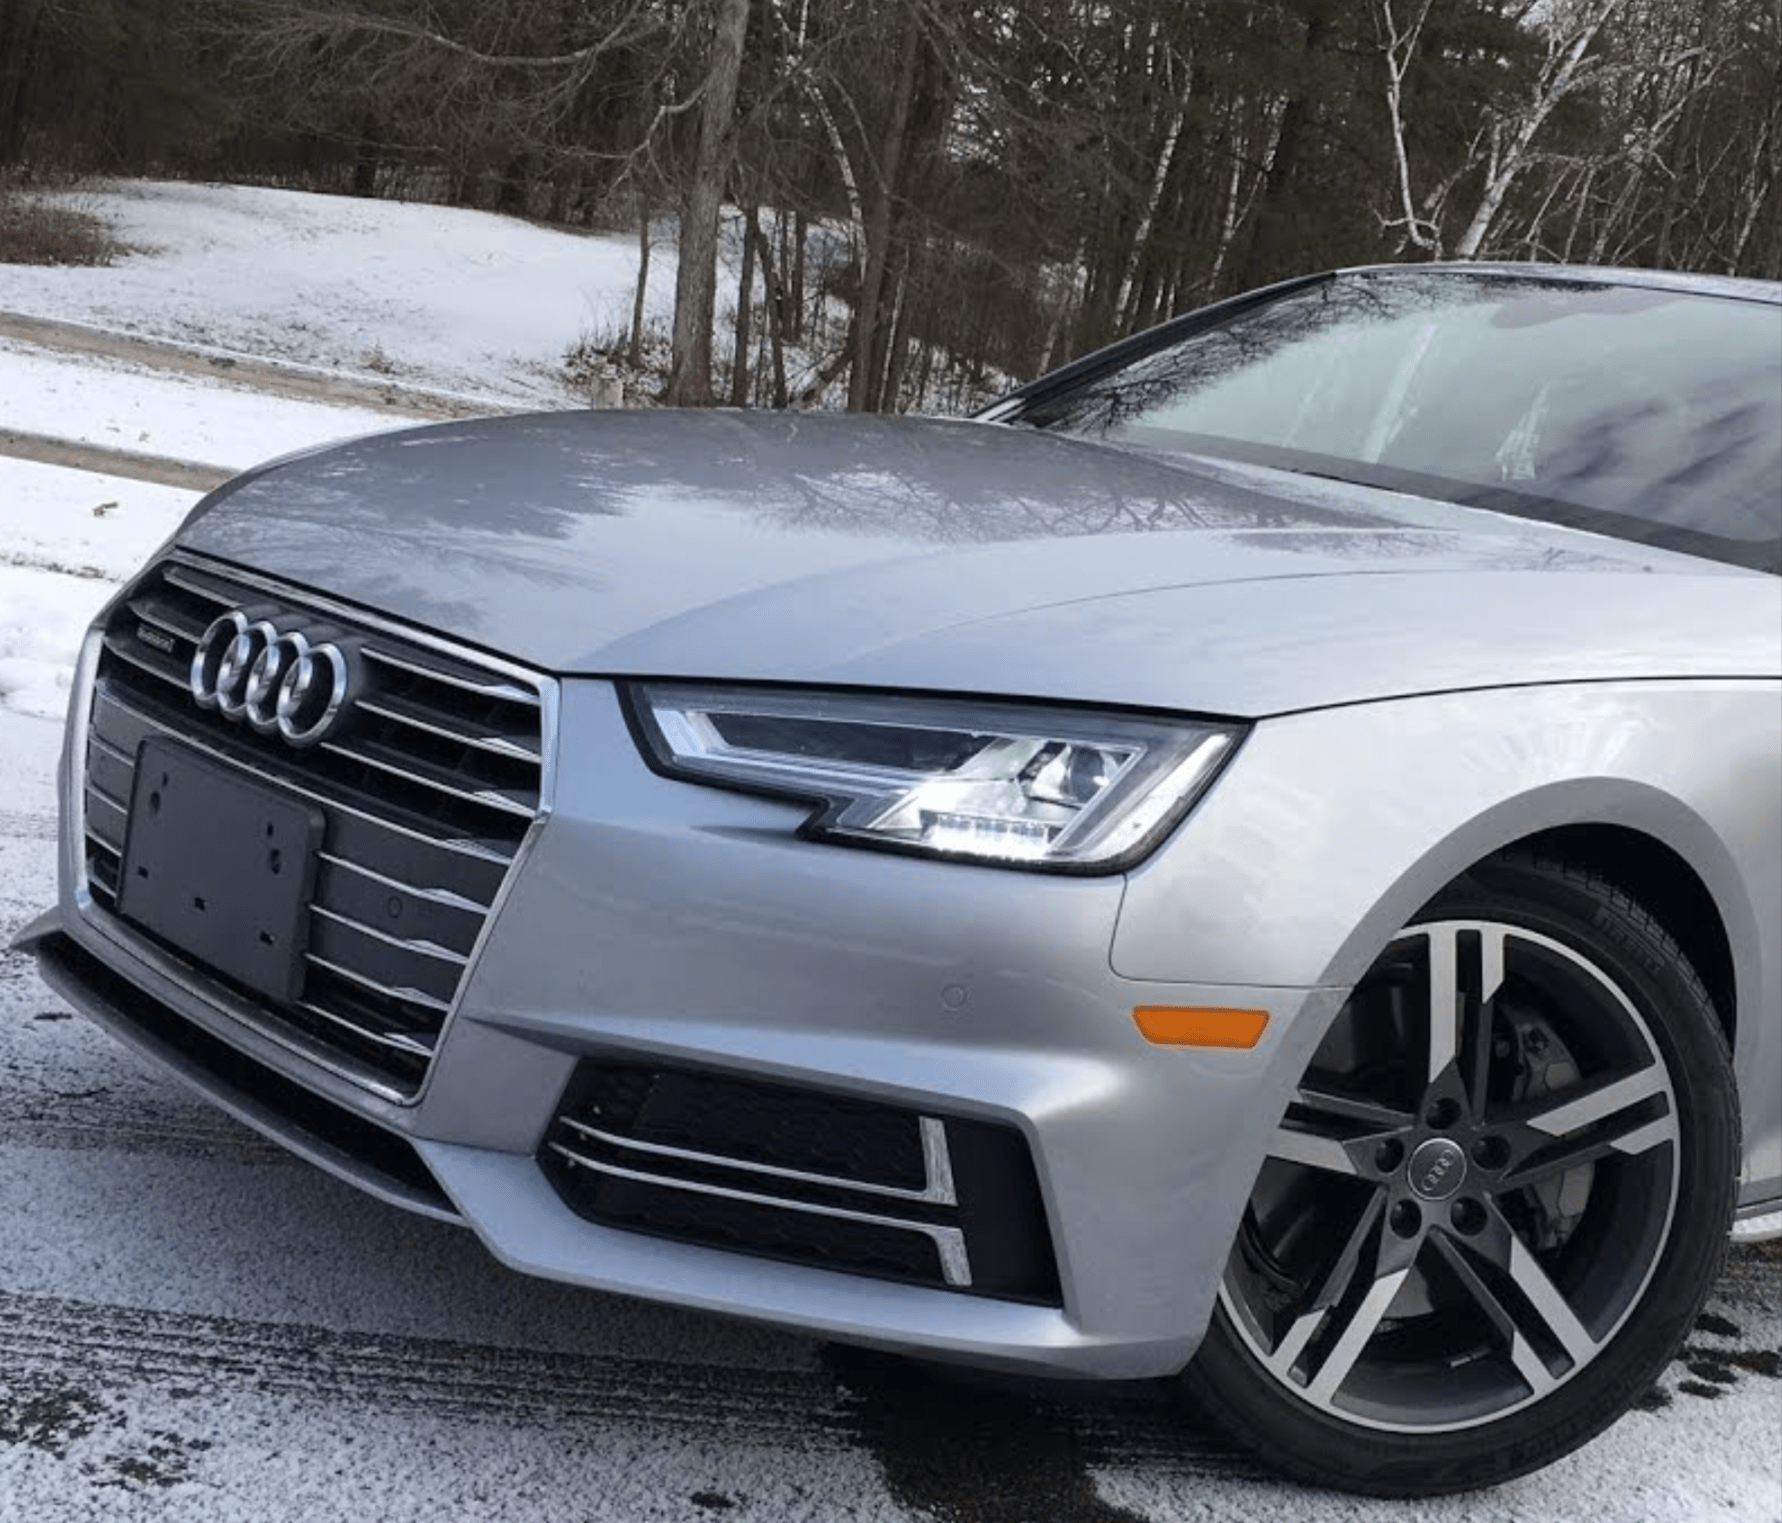 A4 quattro Extended Warranty